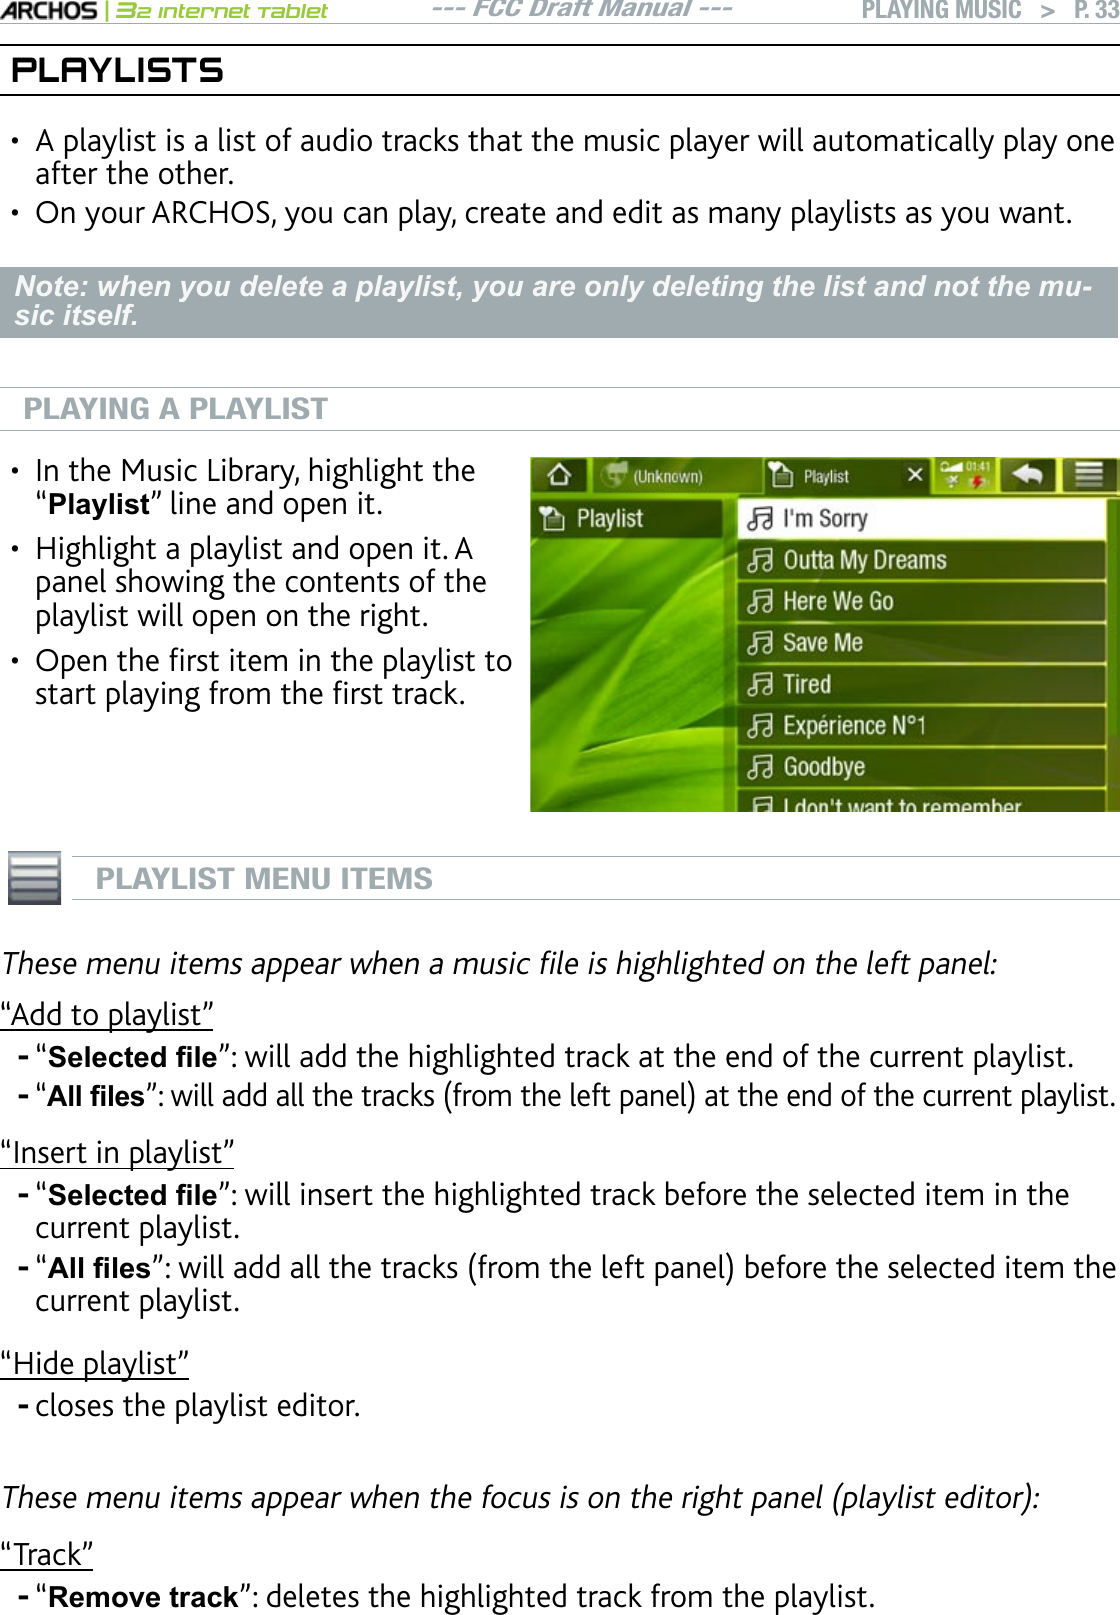 --- FCC Draft Manual ---|32 Internet TabletPLAYING MUSIC   &gt; P. 33PLAYLISTSA playlist is a list of audio tracks that the music player will automatically play one after the other.On your ARCHOS, you can play, create and edit as many playlists as you want.Note: when you delete a playlist, you are only deleting the list and not the mu-sic itself.PLAYING A PLAYLIST+PVJG/WUKE.KDTCT[JKIJNKIJVVJG“Playlist” line and open it.Highlight a playlist and open it. A panel showing the contents of the playlist will open on the right.1RGPVJGÒTUVKVGOKPVJGRNC[NKUVVQUVCTVRNC[KPIHTQOVJGÒTUVVTCEM•••PLAYLIST MENU ITEMS6JGUGOGPWKVGOUCRRGCTYJGPCOWUKEÒNGKUJKIJNKIJVGFQPVJGNGHVRCPGN“Add to playlist”“6HOHFWHG¿OH”: will add the highlighted track at the end of the current playlist.“$OO¿OHVnYKNNCFFCNNVJGVTCEMUHTQOVJGNGHVRCPGNCVVJGGPFQHVJGEWTTGPVRNC[NKUVm+PUGTVKPRNC[NKUVn“6HOHFWHG¿OH”: will insert the highlighted track before the selected item in the current playlist.“$OO¿OHVnYKNNCFFCNNVJGVTCEMUHTQOVJGNGHVRCPGNDGHQTGVJGUGNGEVGFKVGOVJGcurrent playlist.“Hide playlist”closes the playlist editor.6JGUGOGPWKVGOUCRRGCTYJGPVJGHQEWUKUQPVJGTKIJVRCPGNRNC[NKUVGFKVQT“Track”“5HPRYHWUDFN”: deletes the highlighted track from the playlist.••------